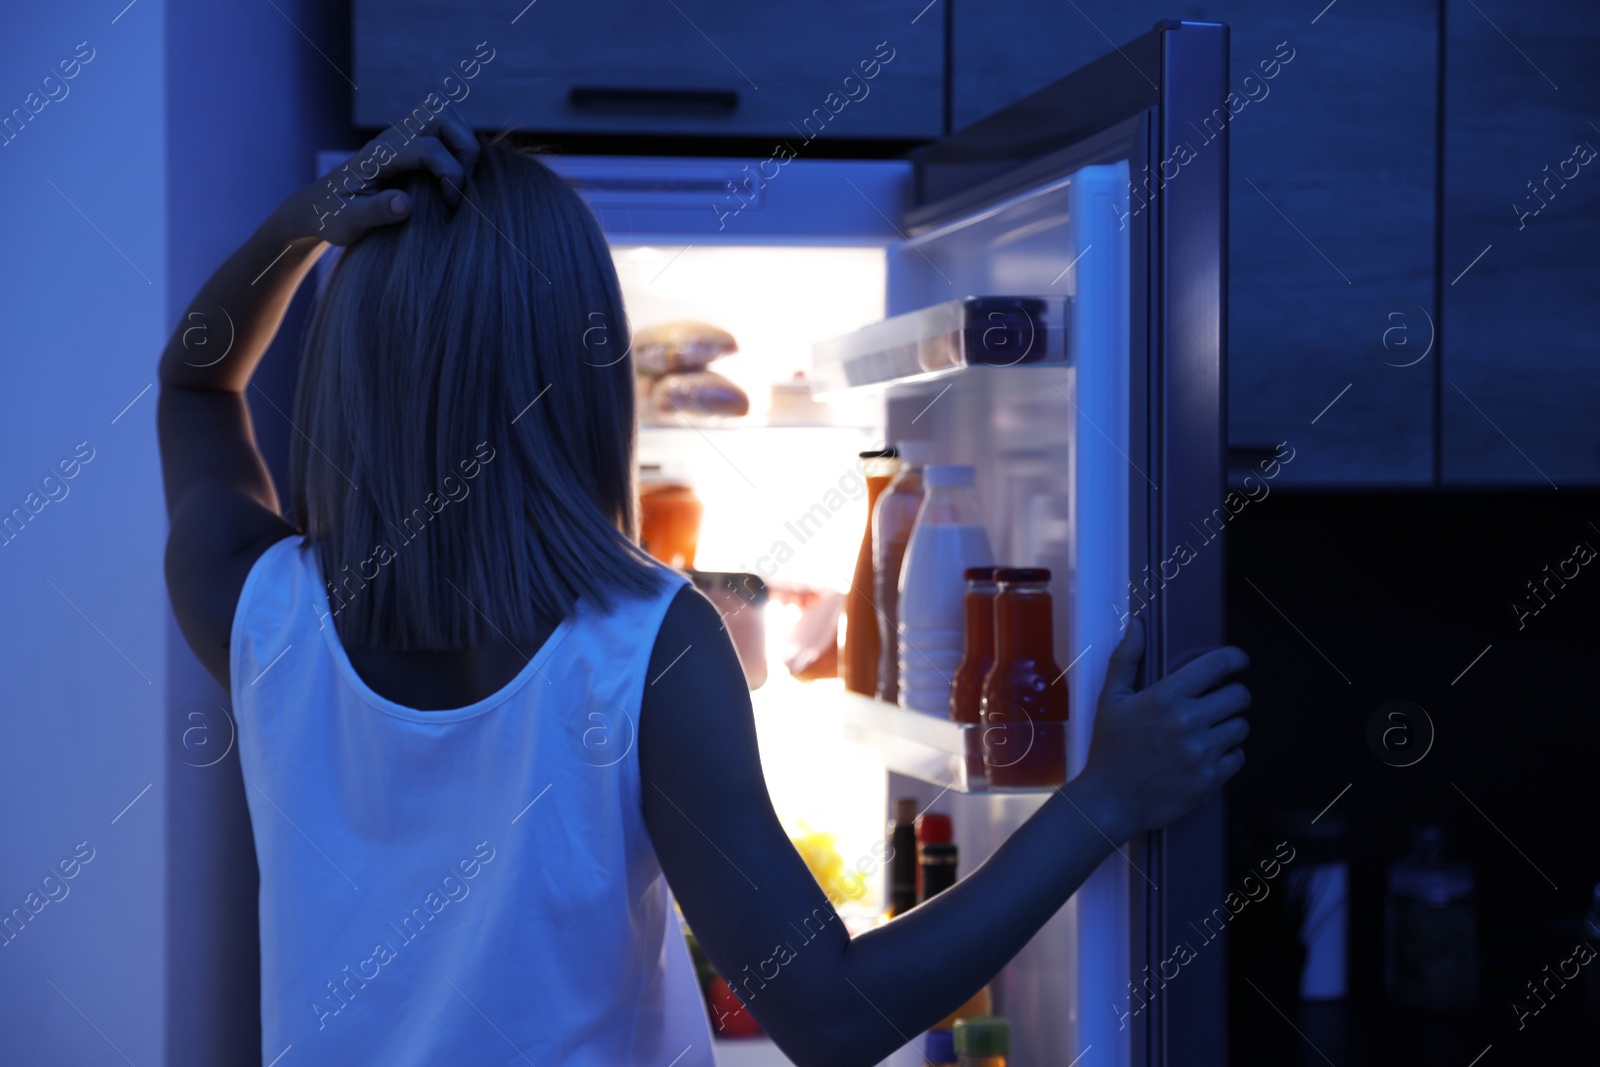 Photo of Woman looking into refrigerator full of products at night